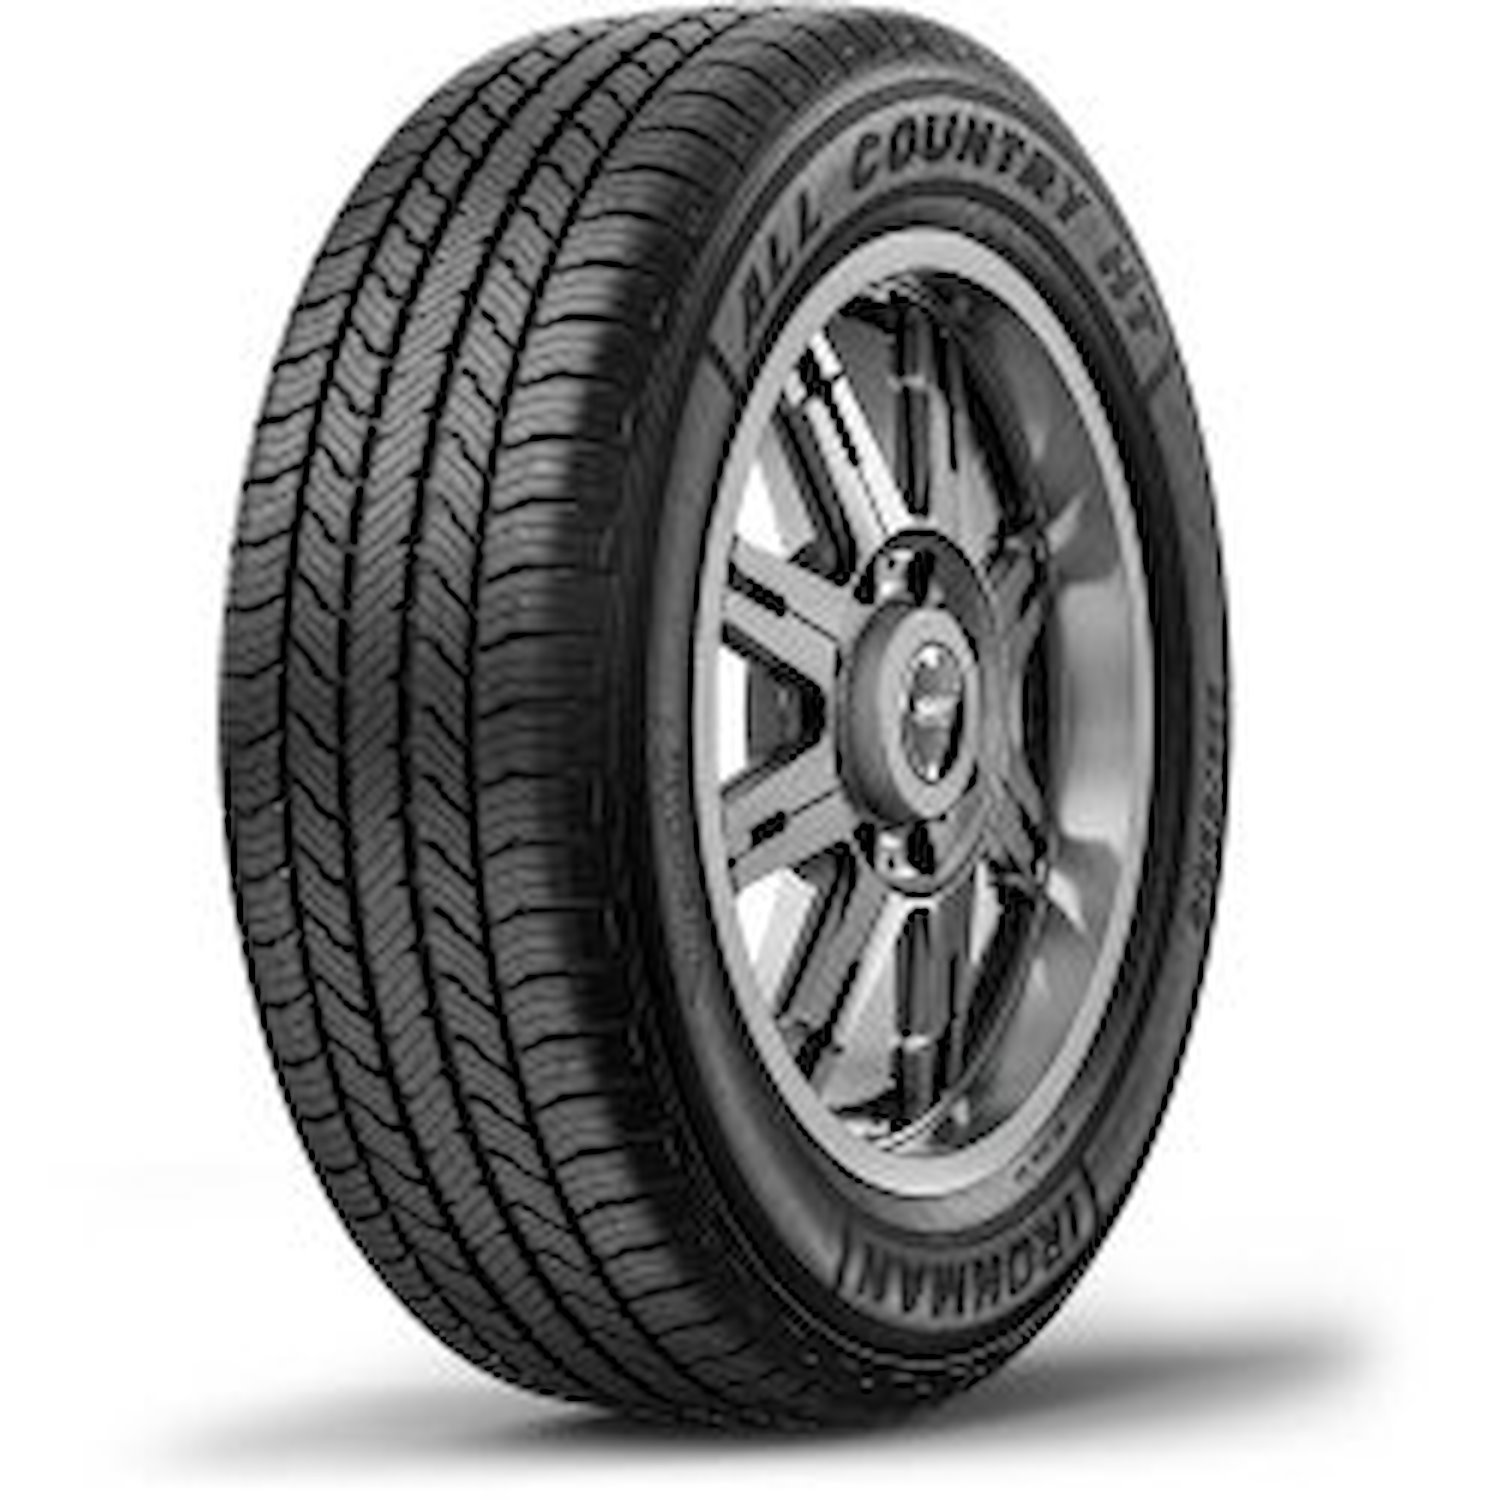 03098 All Country HT Tire, 255/60R19, 109H